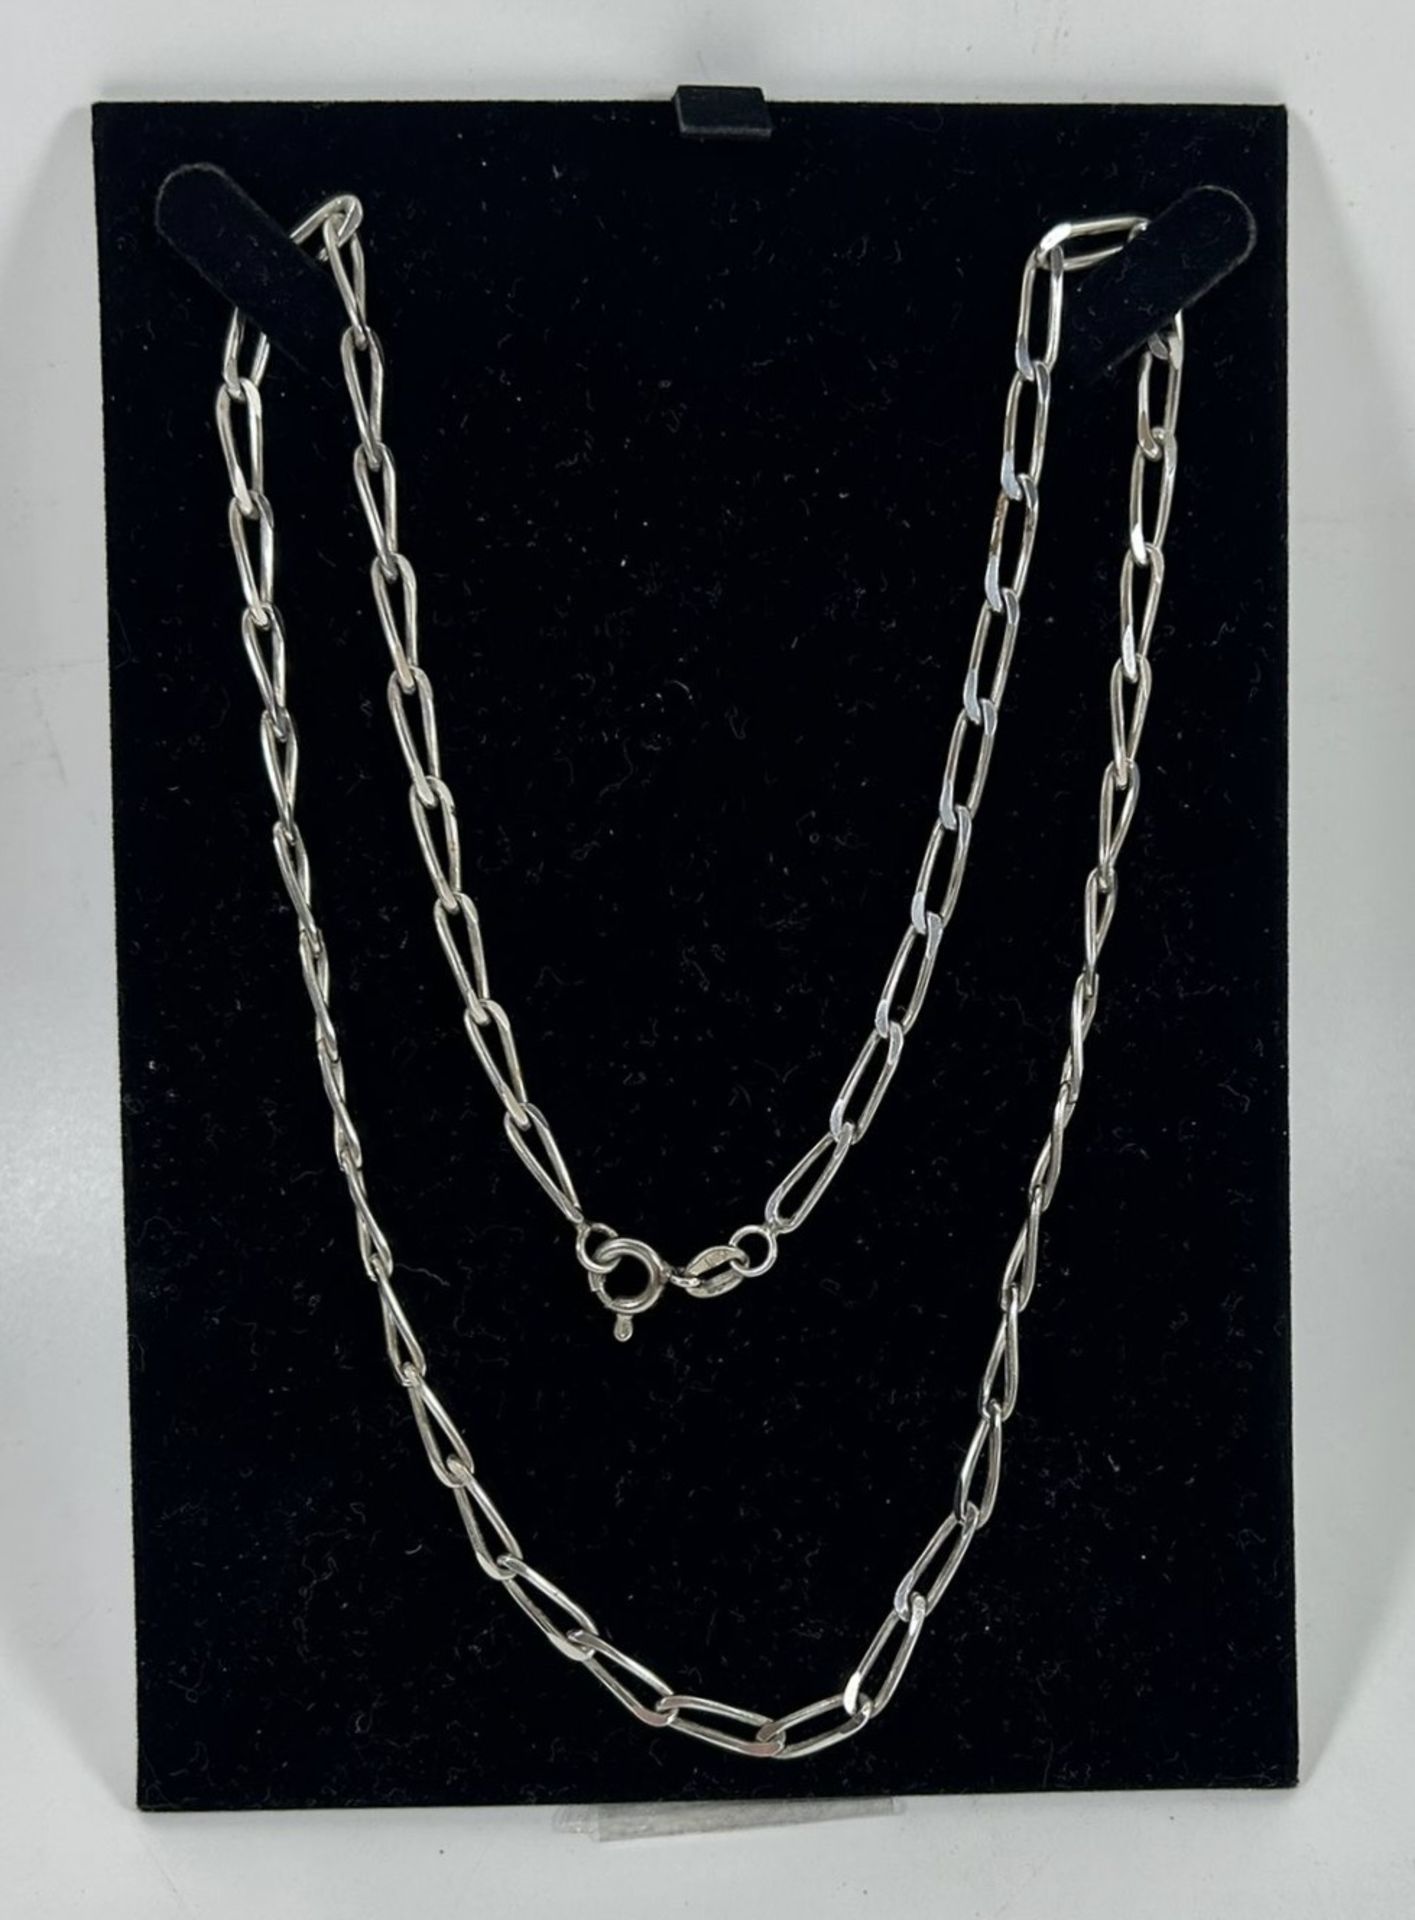 A .925 SILVER INTERLINK CHAIN NECKLACE, 20" CHAIN LENGTH